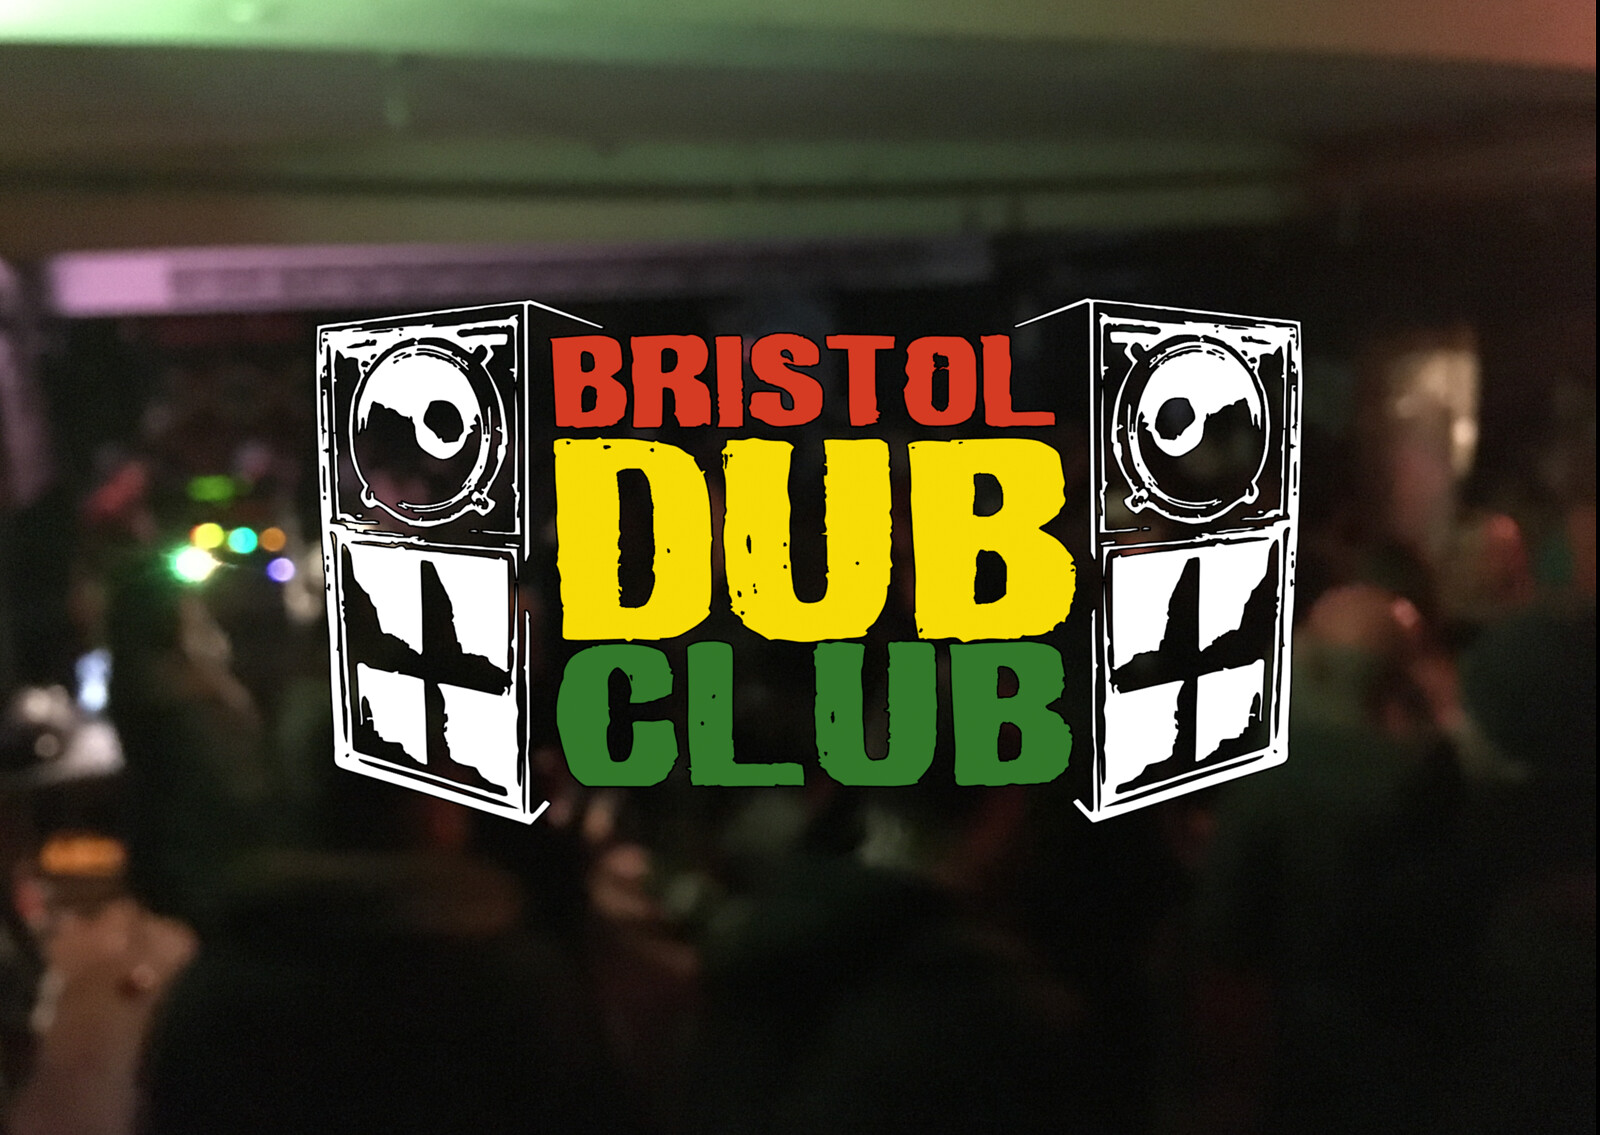 Bristol Dub Club presents 2 sounds in the arena at The Black Swan